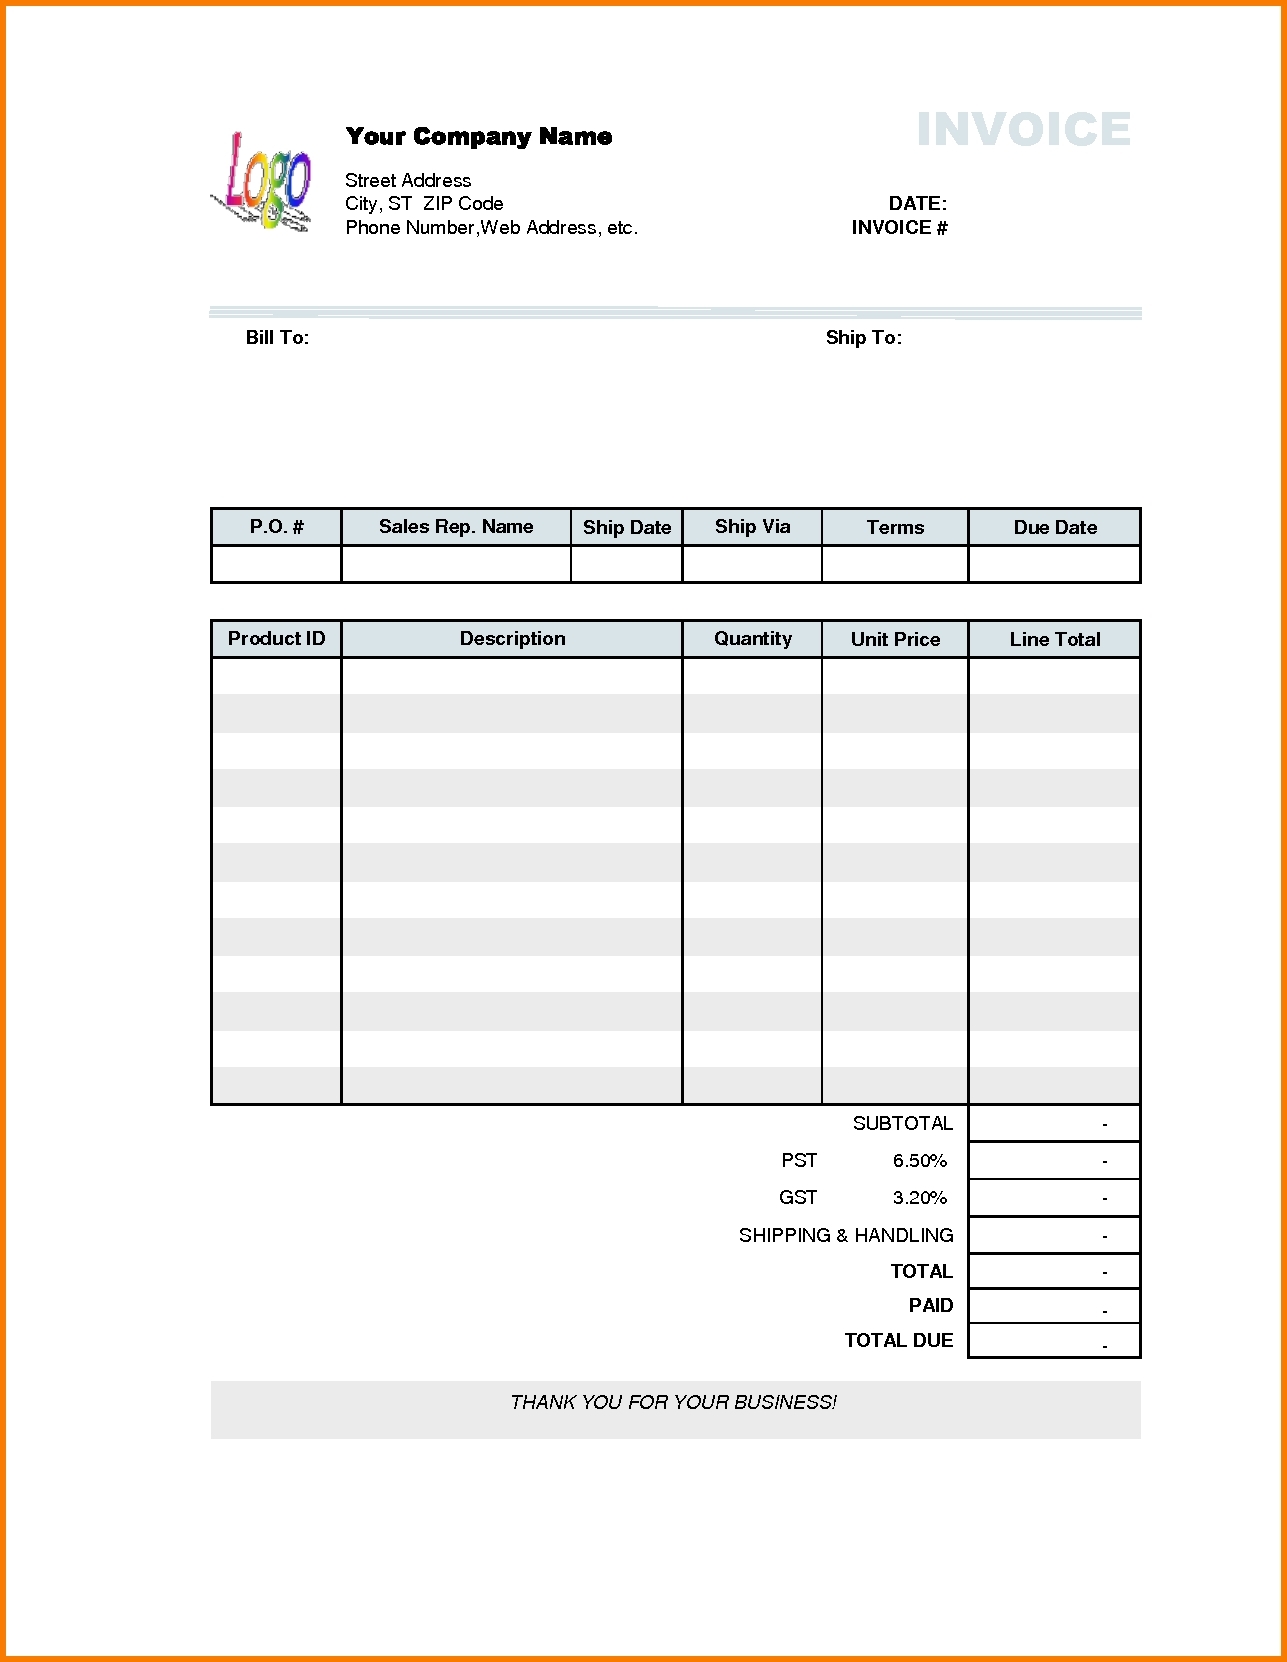 free invoice online invoice template ideas invoice free online